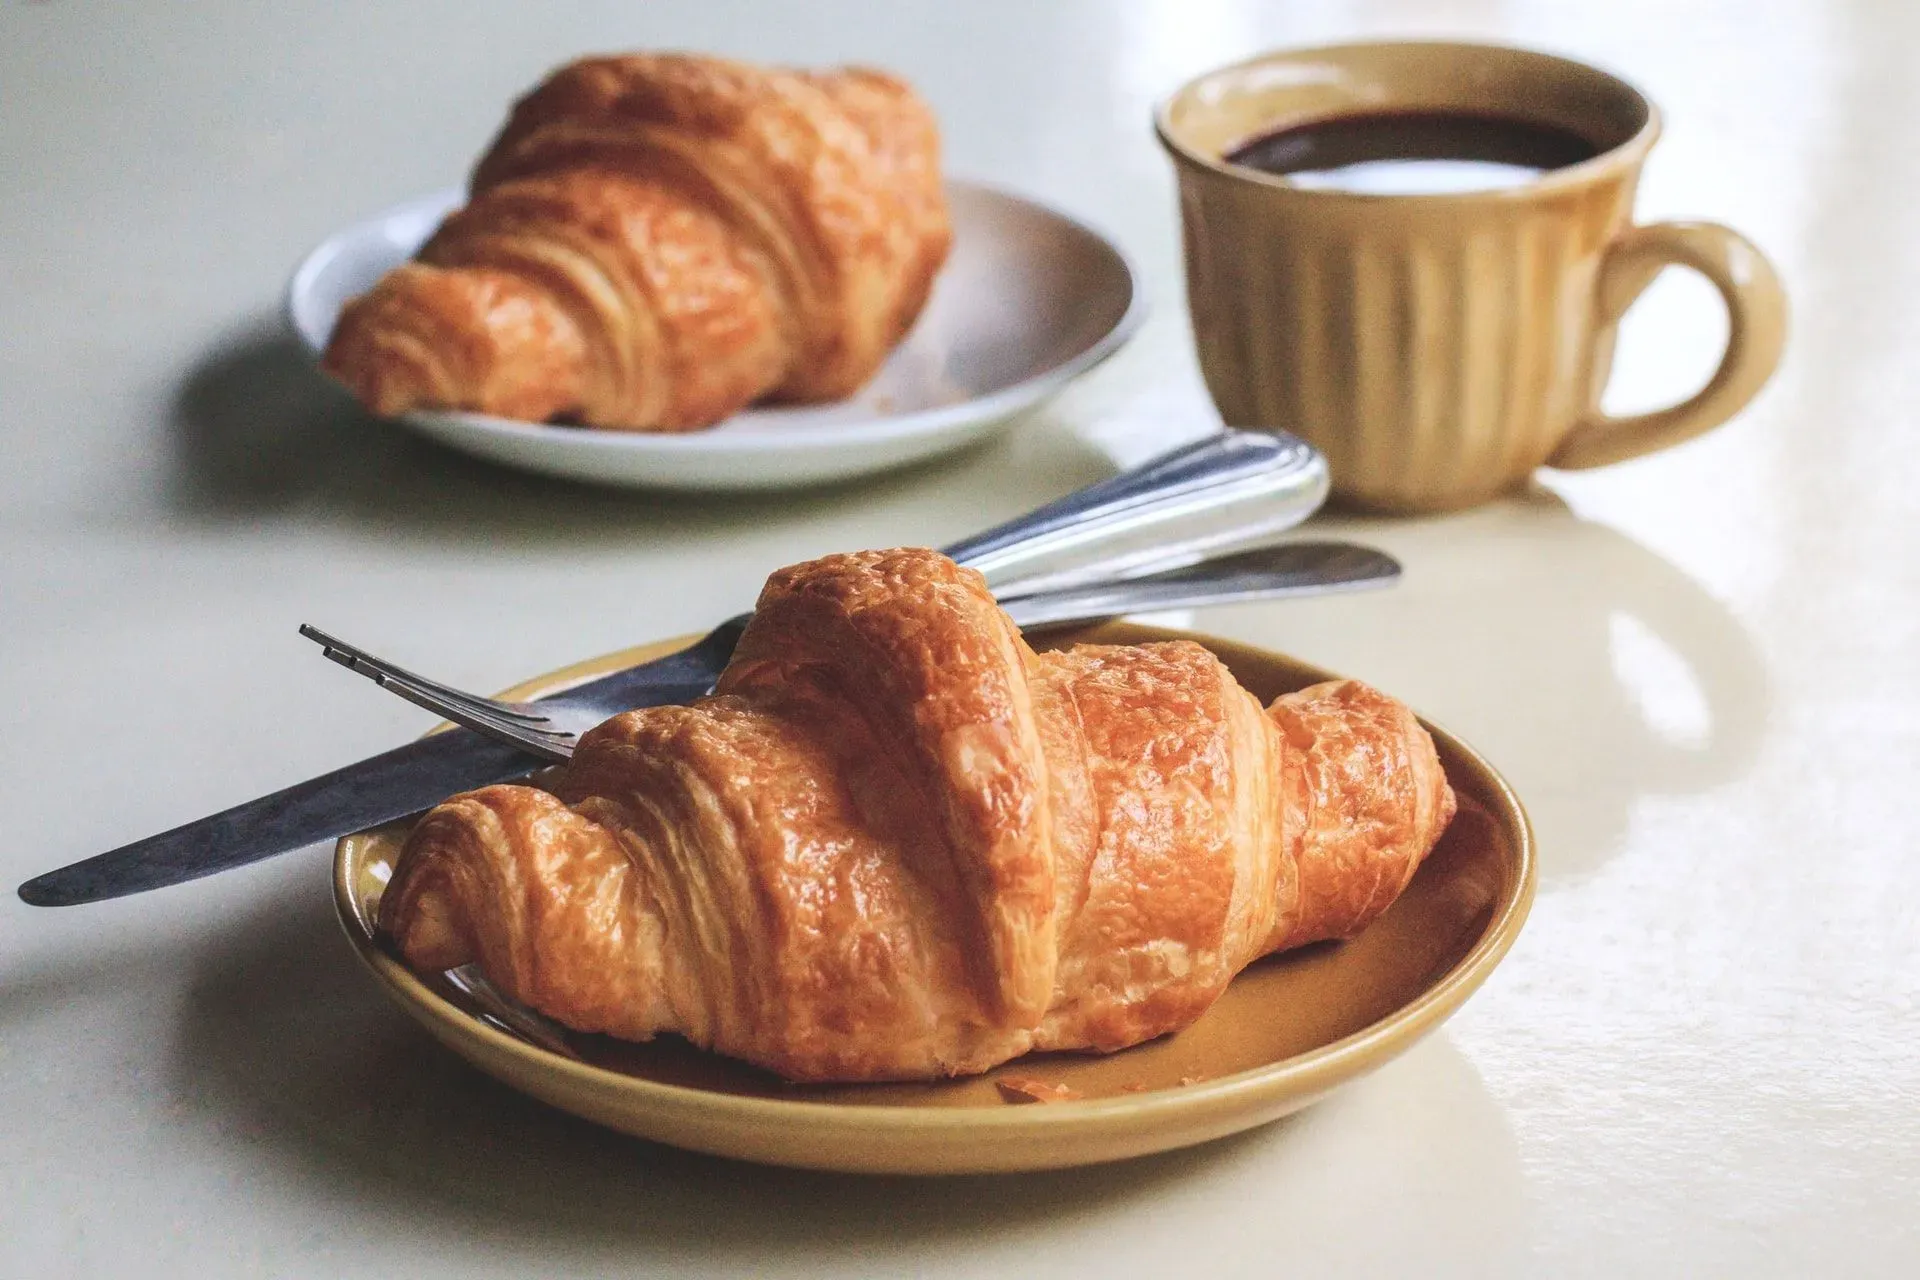 People living in the US often eat warm croissants which are filled with cheese or ham.